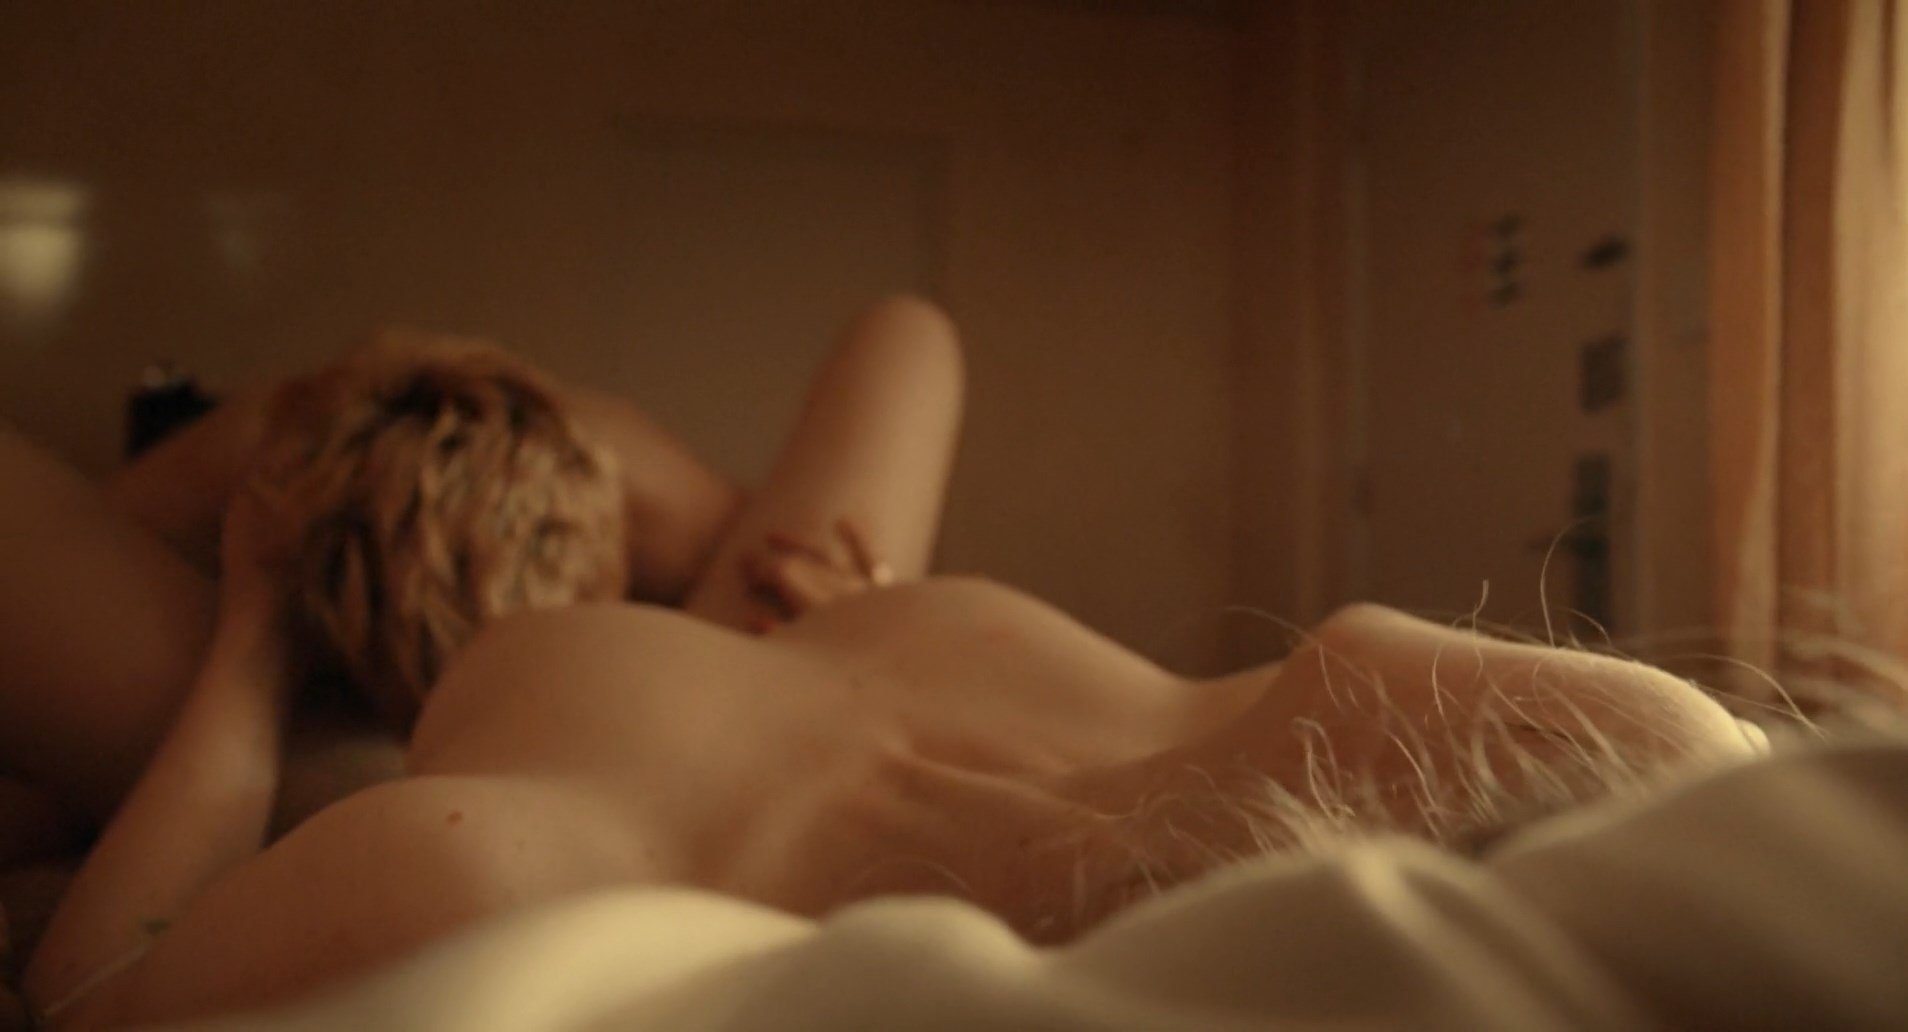 Imogen Poots Nude - Mobile Homes (6 Pics + Video)